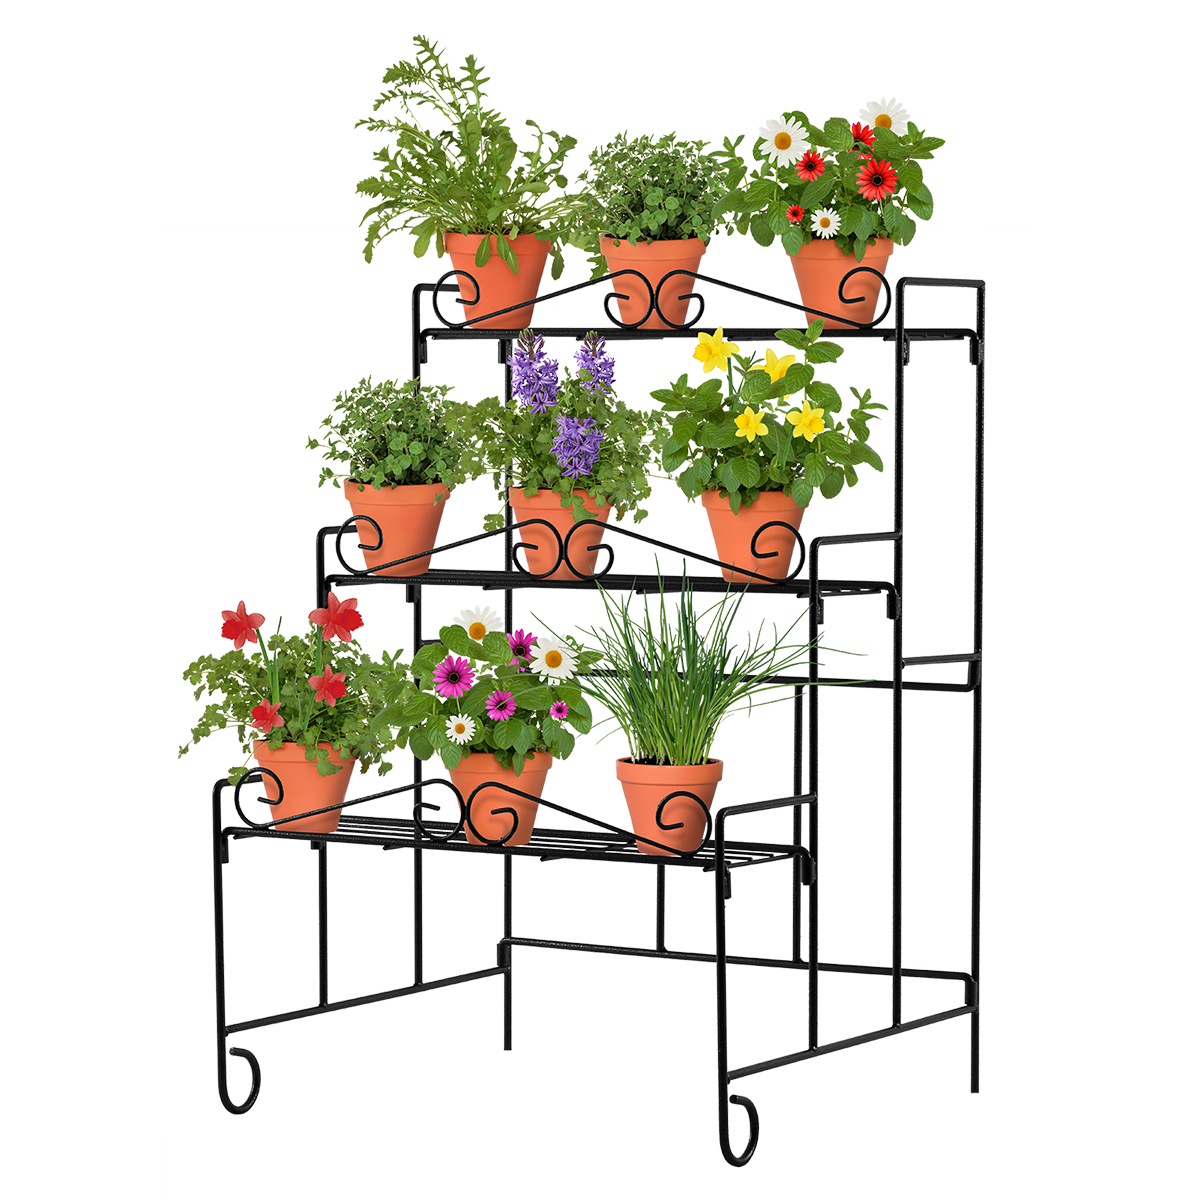 18197 Plant Stand Wall with pot plants